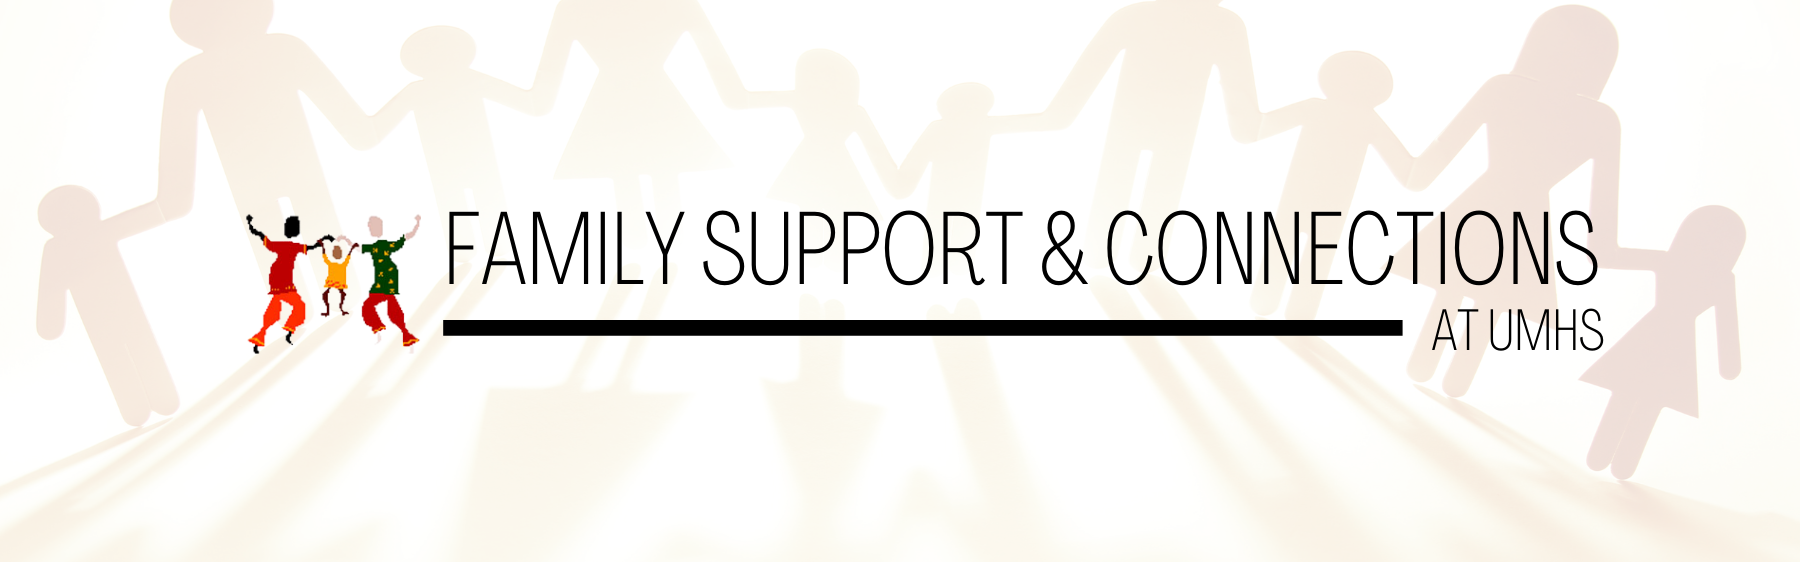 Family Support and Connections logo with people